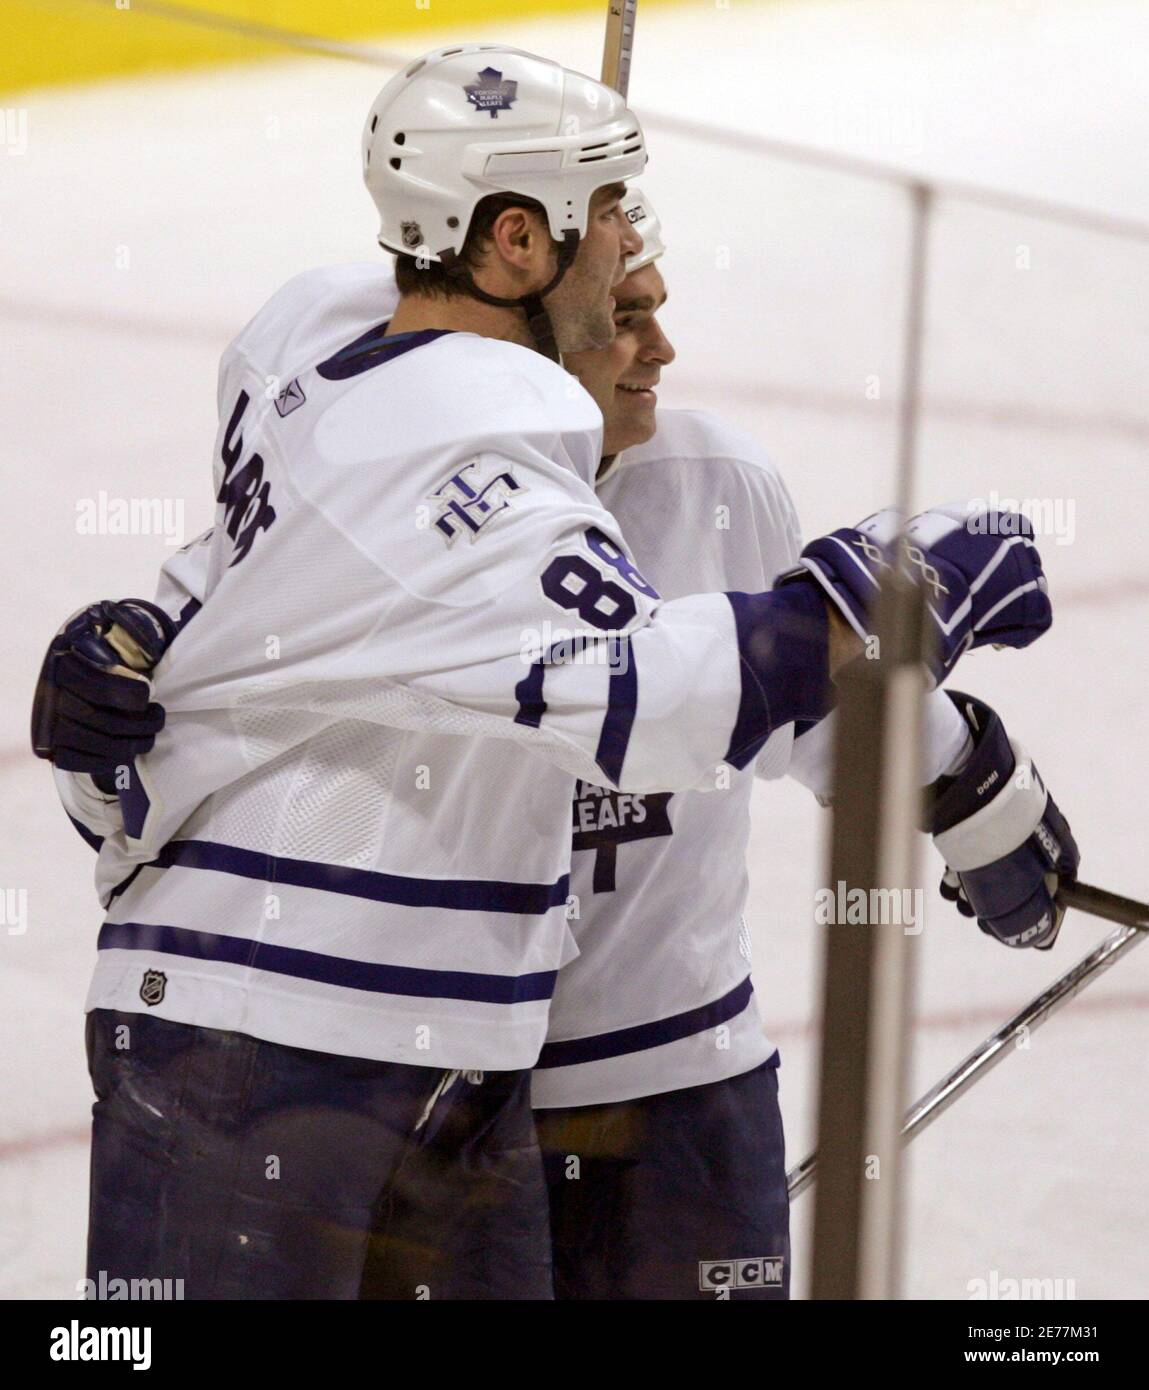 Toronto Maple Leafs Tie Domi (R) congratulates teammate Eric Lindros after  Lindros scored a goal during third period play in their NHL game in Boston  November 17, 2005. The Maple Leafs won